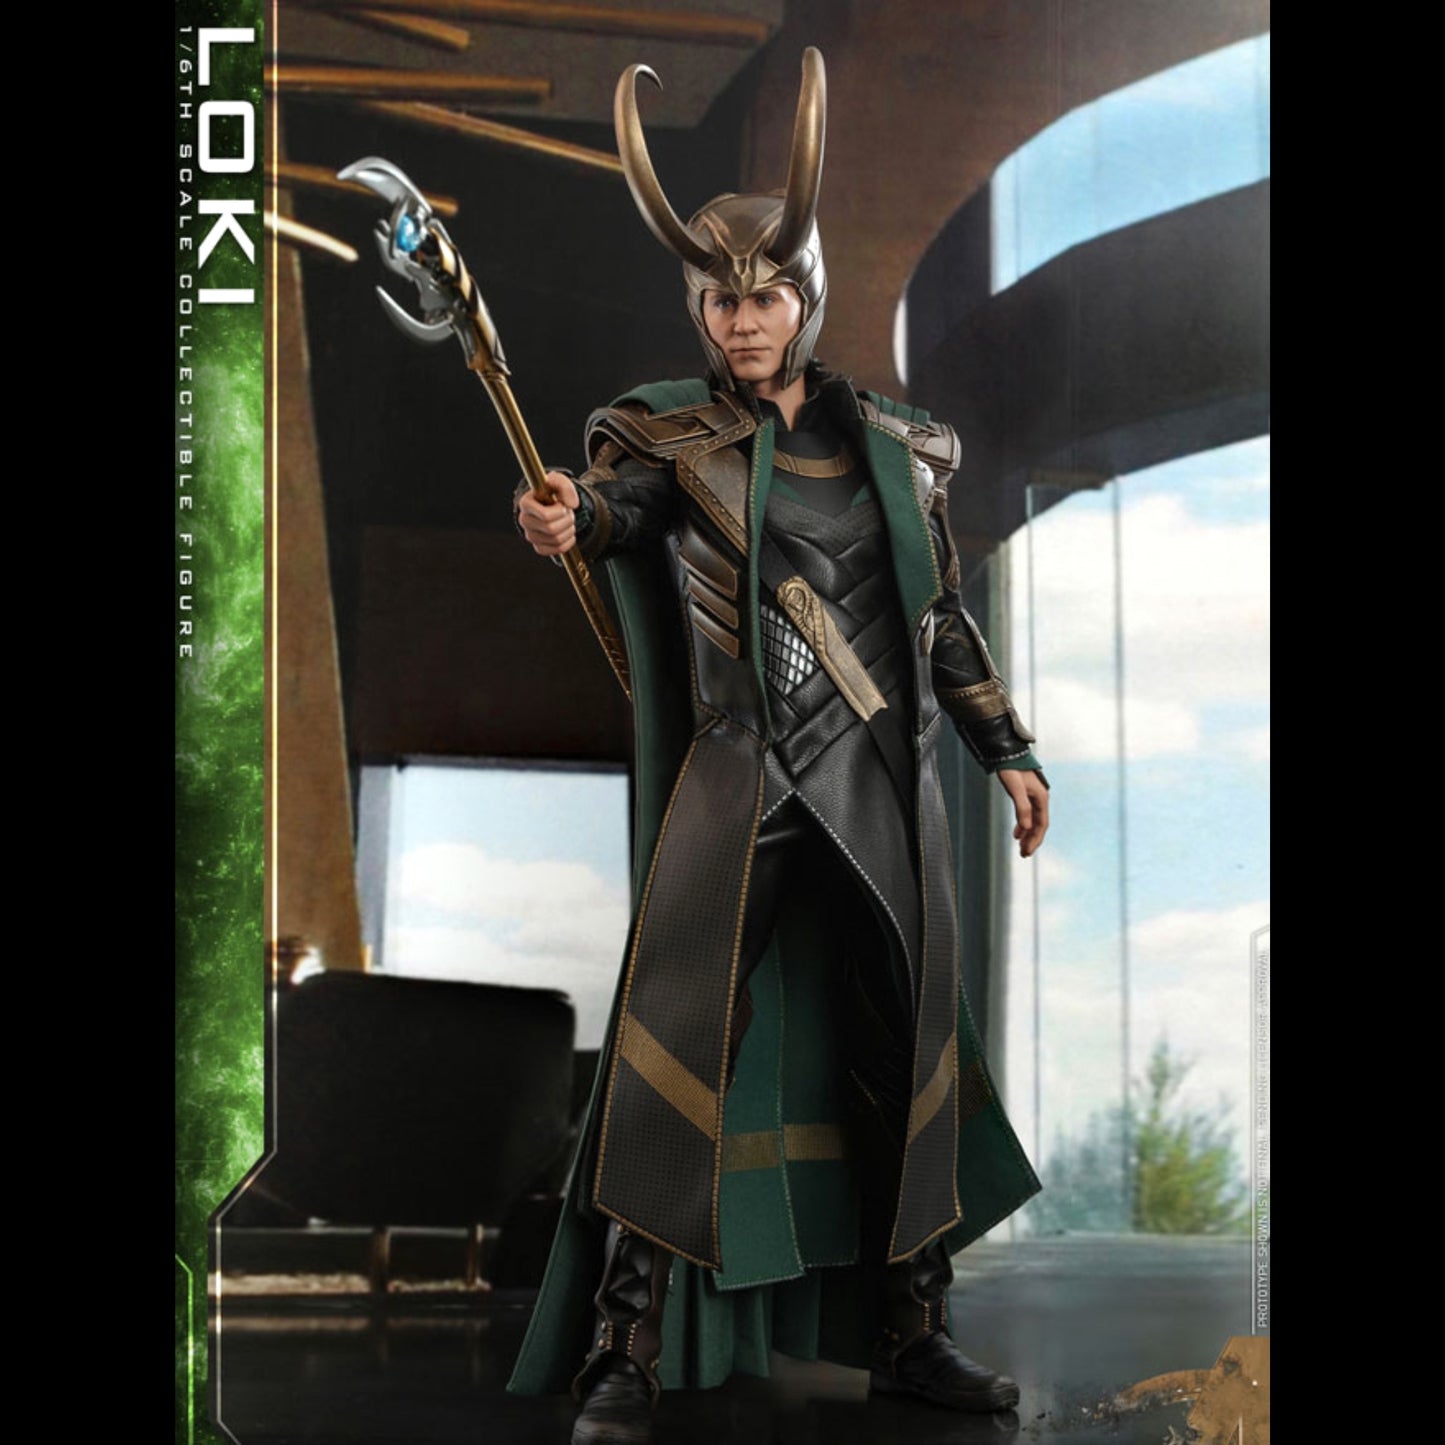 Load image into Gallery viewer, Loki (Avengers: Endgame) Marvel 1:6 Figure by Hot Toys
